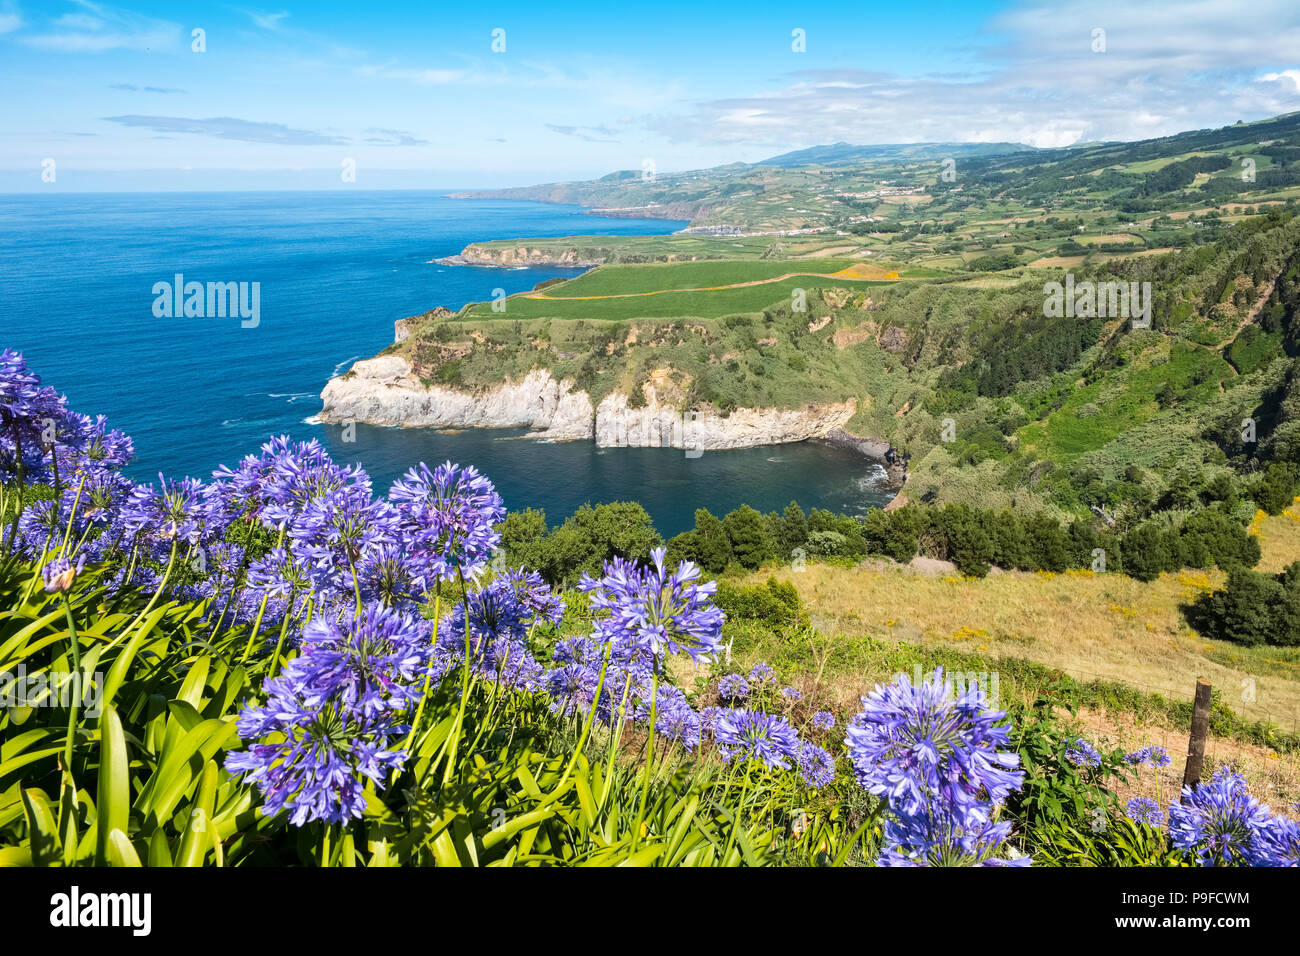 Wildflowers, The Atlantic and the cliffs on the coast of Sao Miguel, The Azores Stock Photo